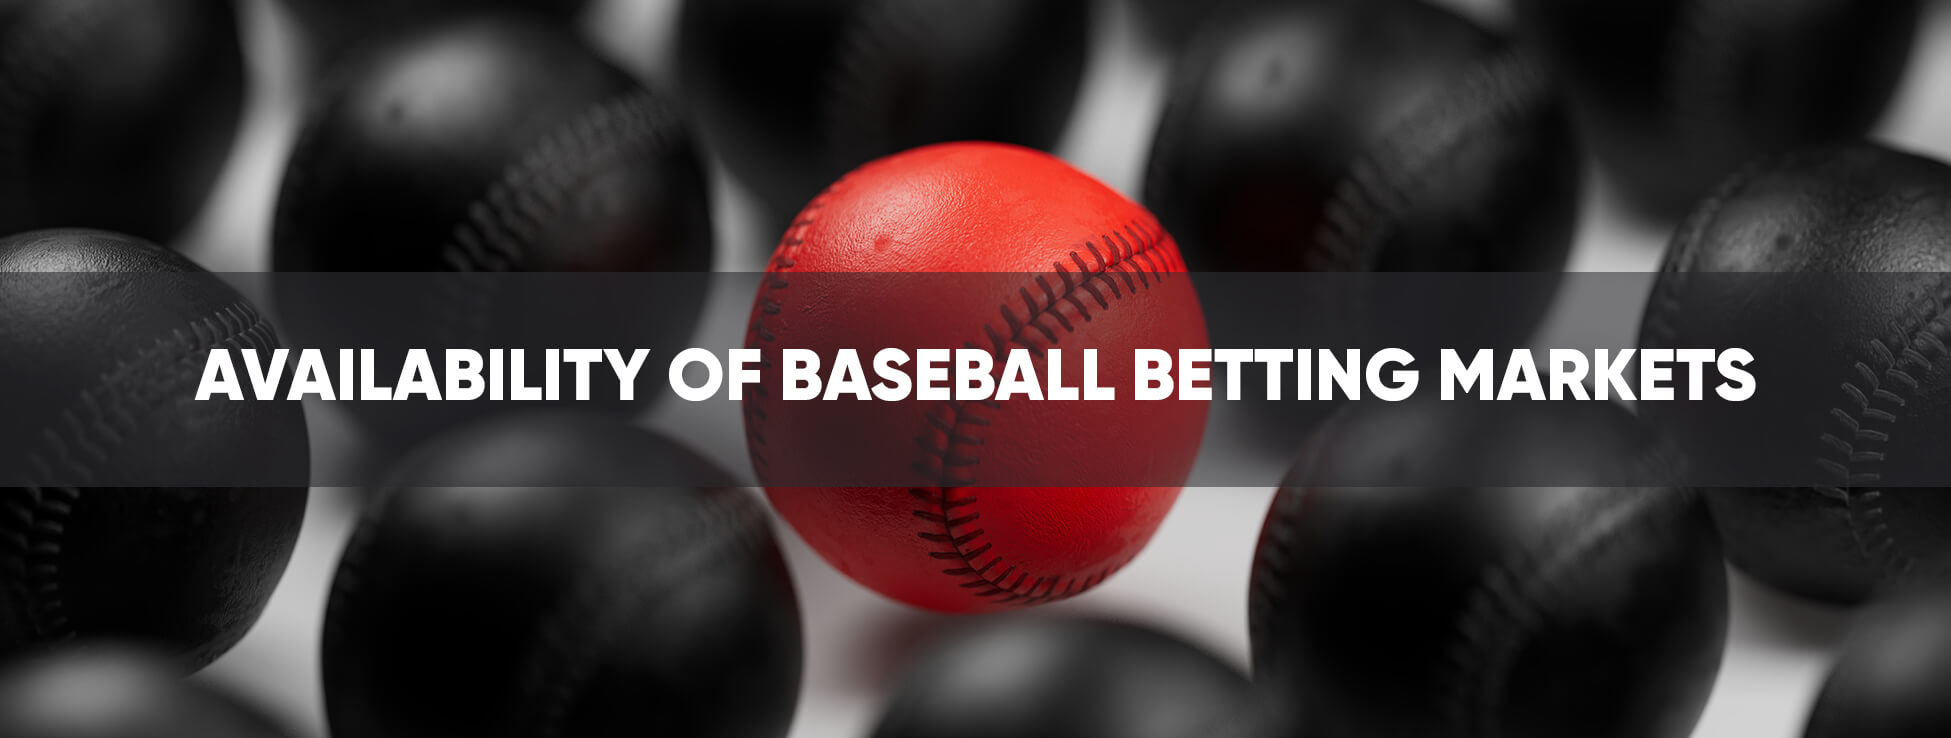 Criteria for evaluating baseball betting sites